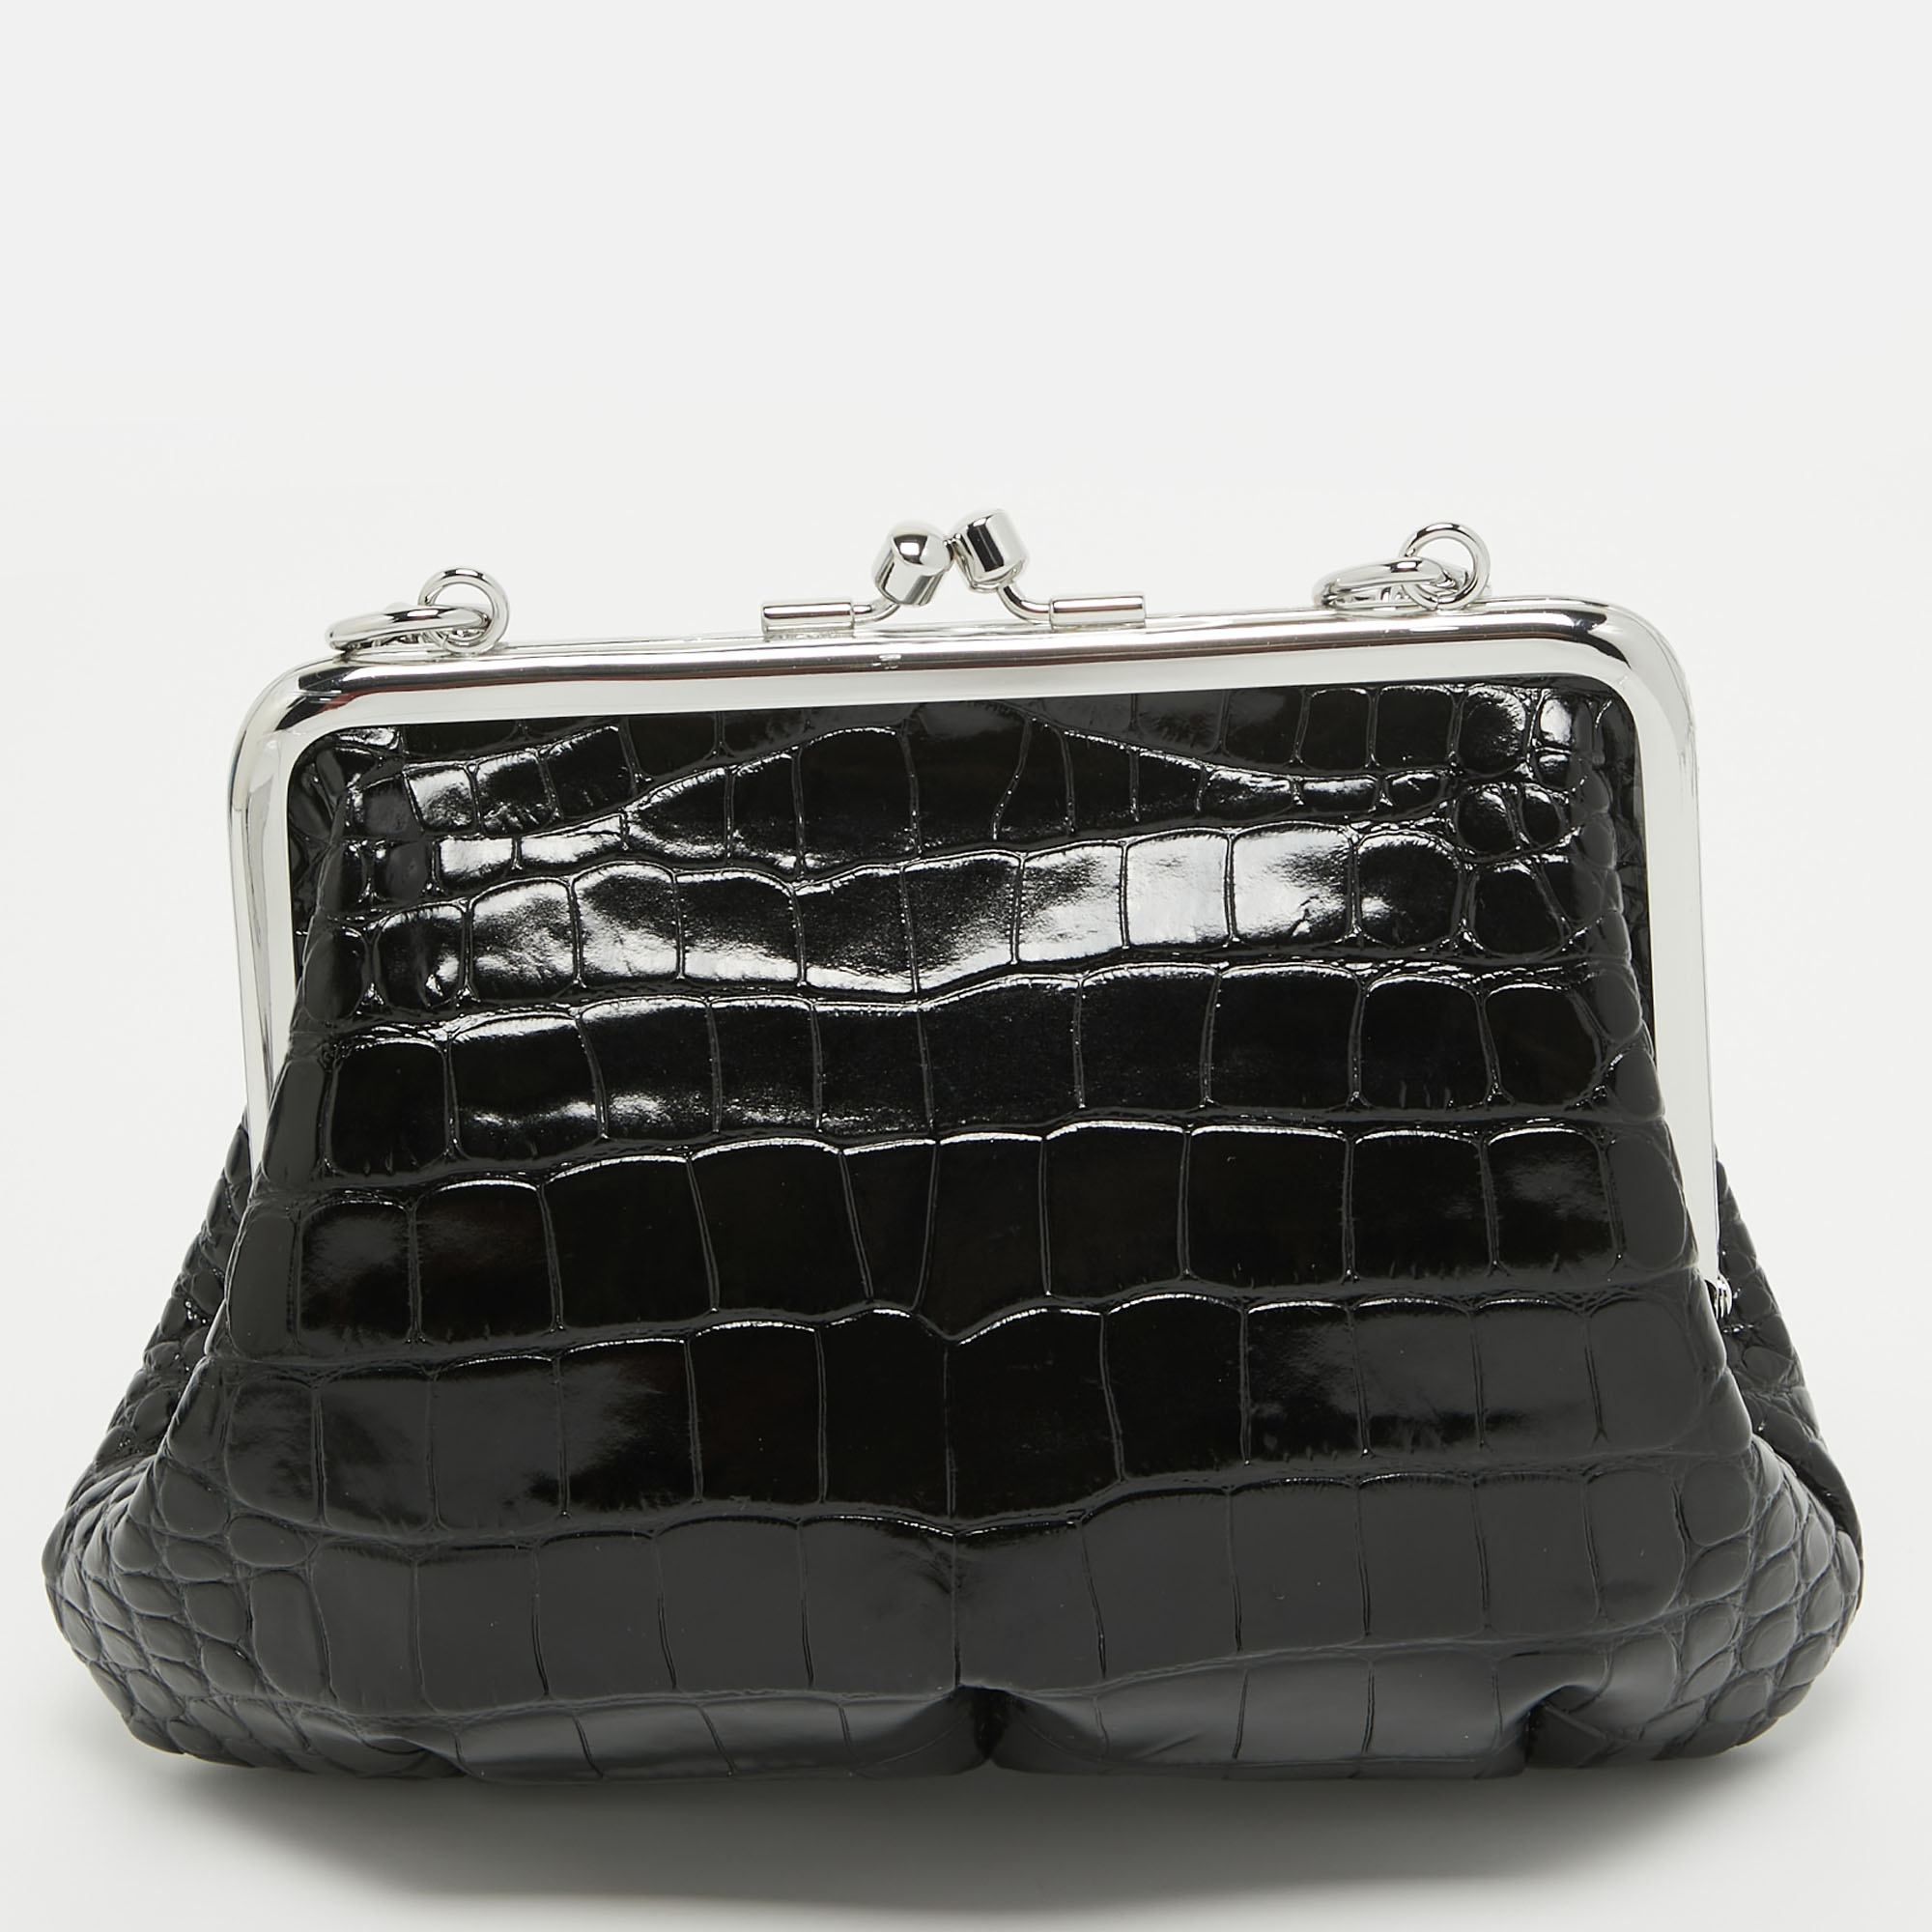 Vivienne Westwood Black Croc Embossed Leather Granny Frame Chain Clutch